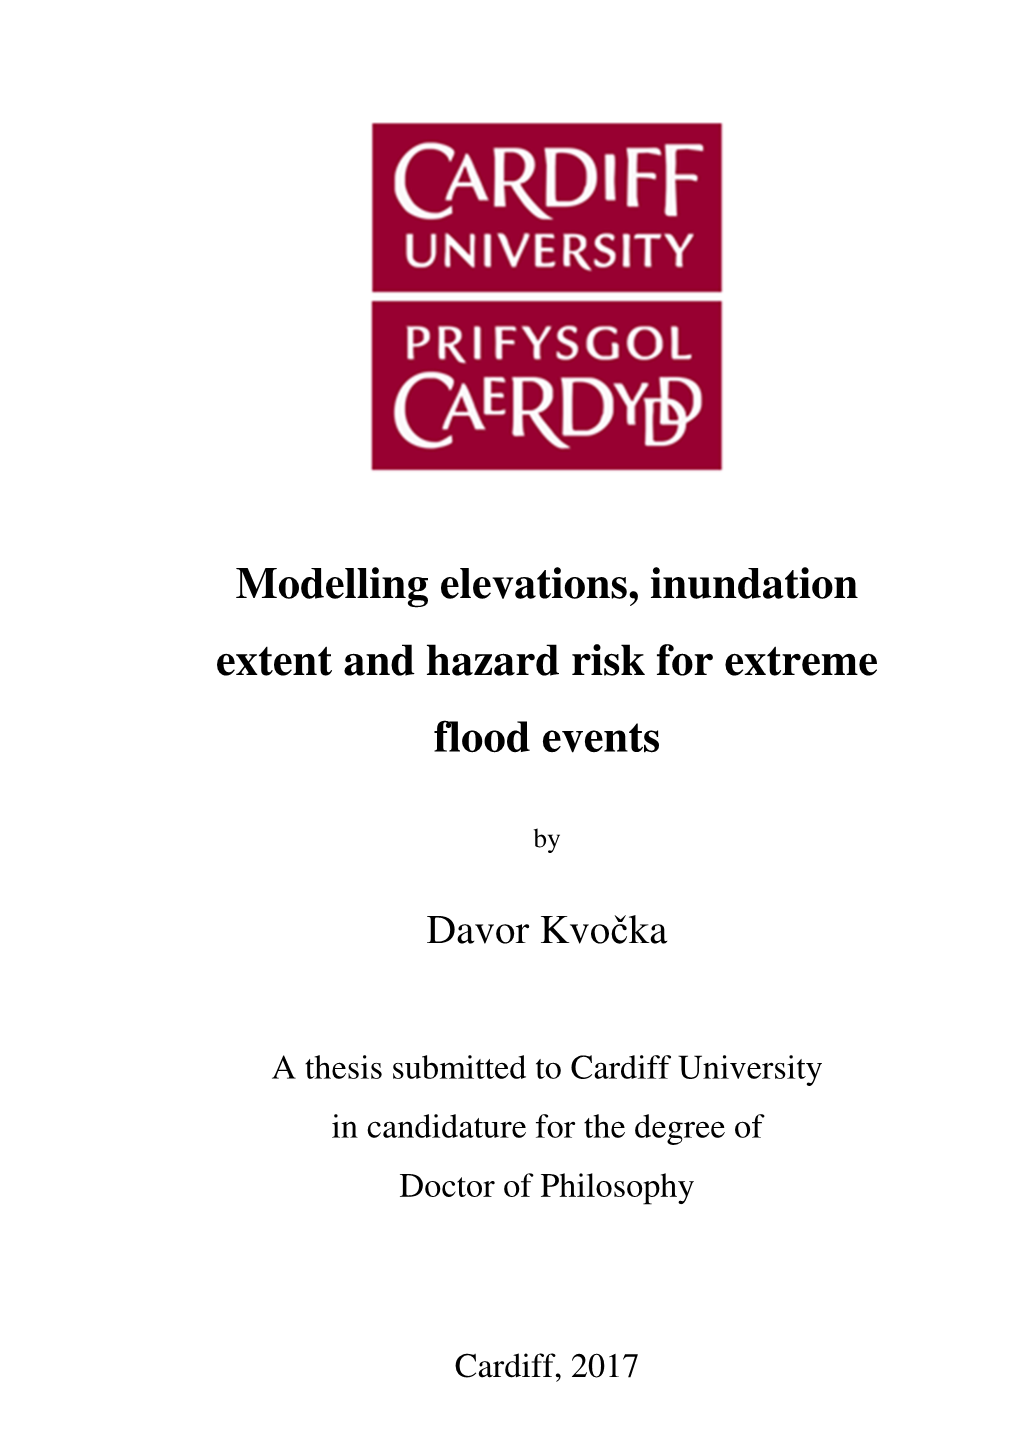 Modelling Elevations, Inundation Extent and Hazard Risk for Extreme Flood Events